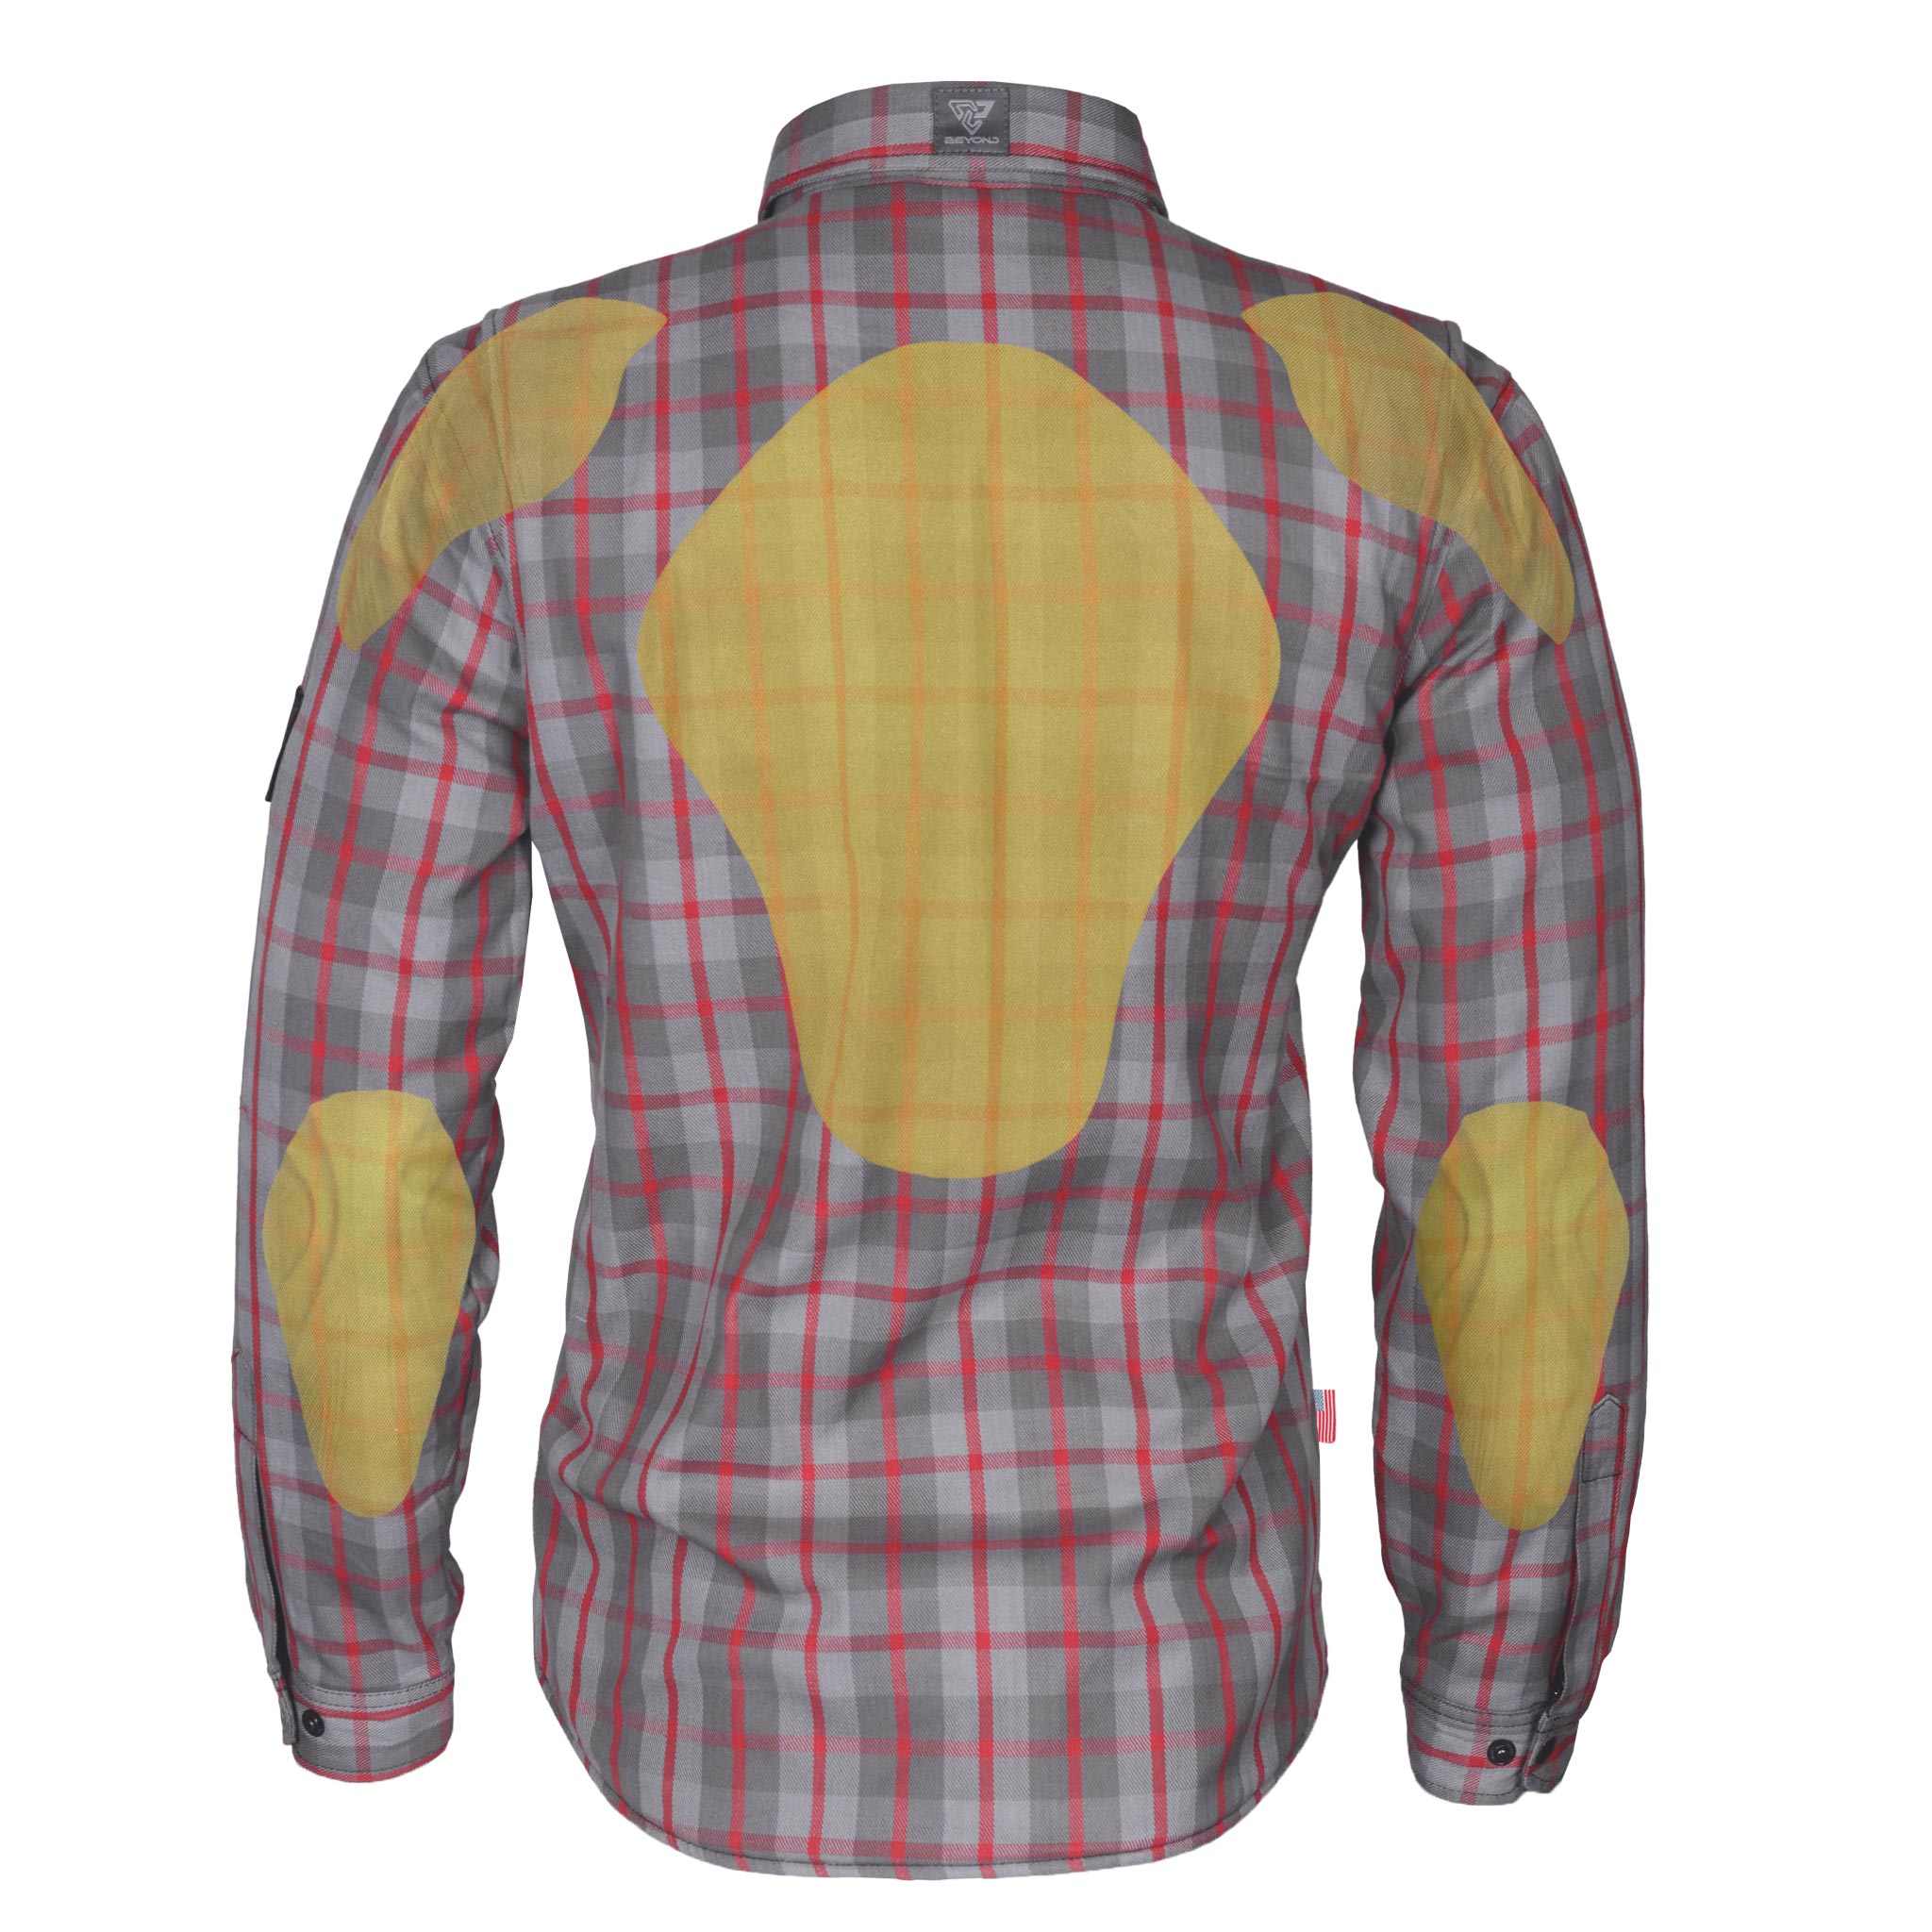 Protective Flannel Shirt "Rogue Road" - Grey and Red Stripes with Pads